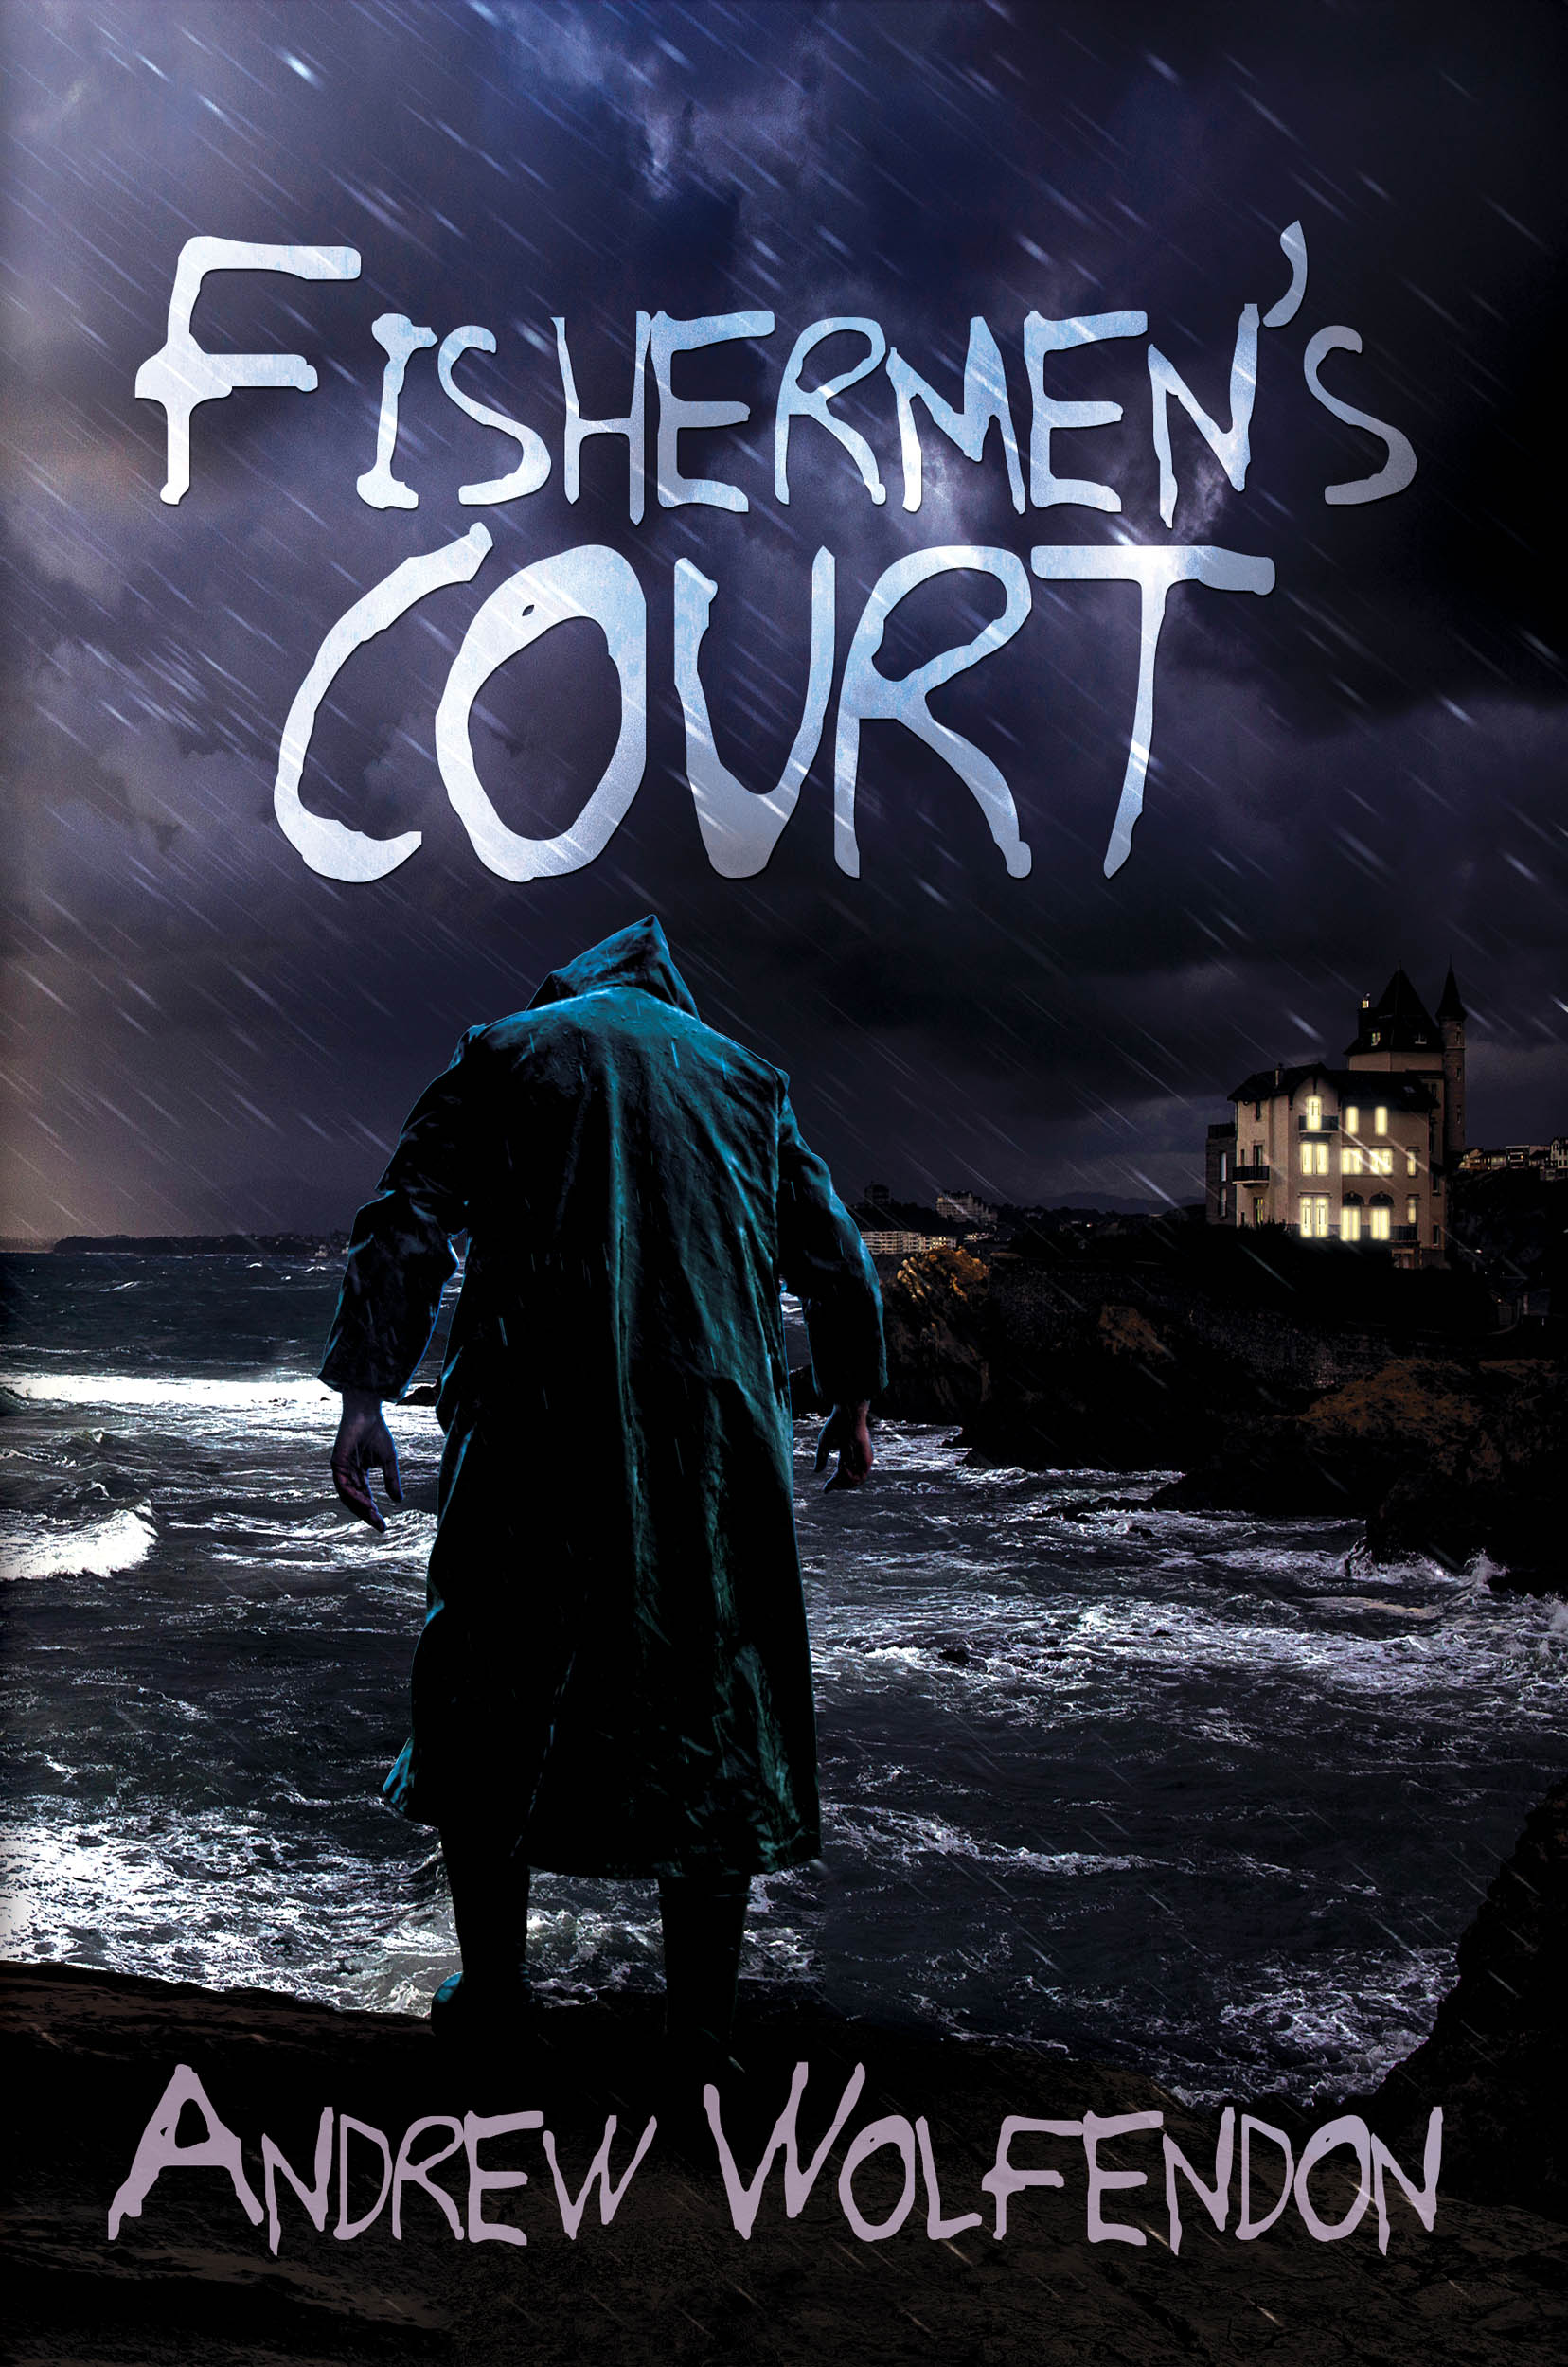 FREE: Fishermen’s Court by Andrew Wolfendon